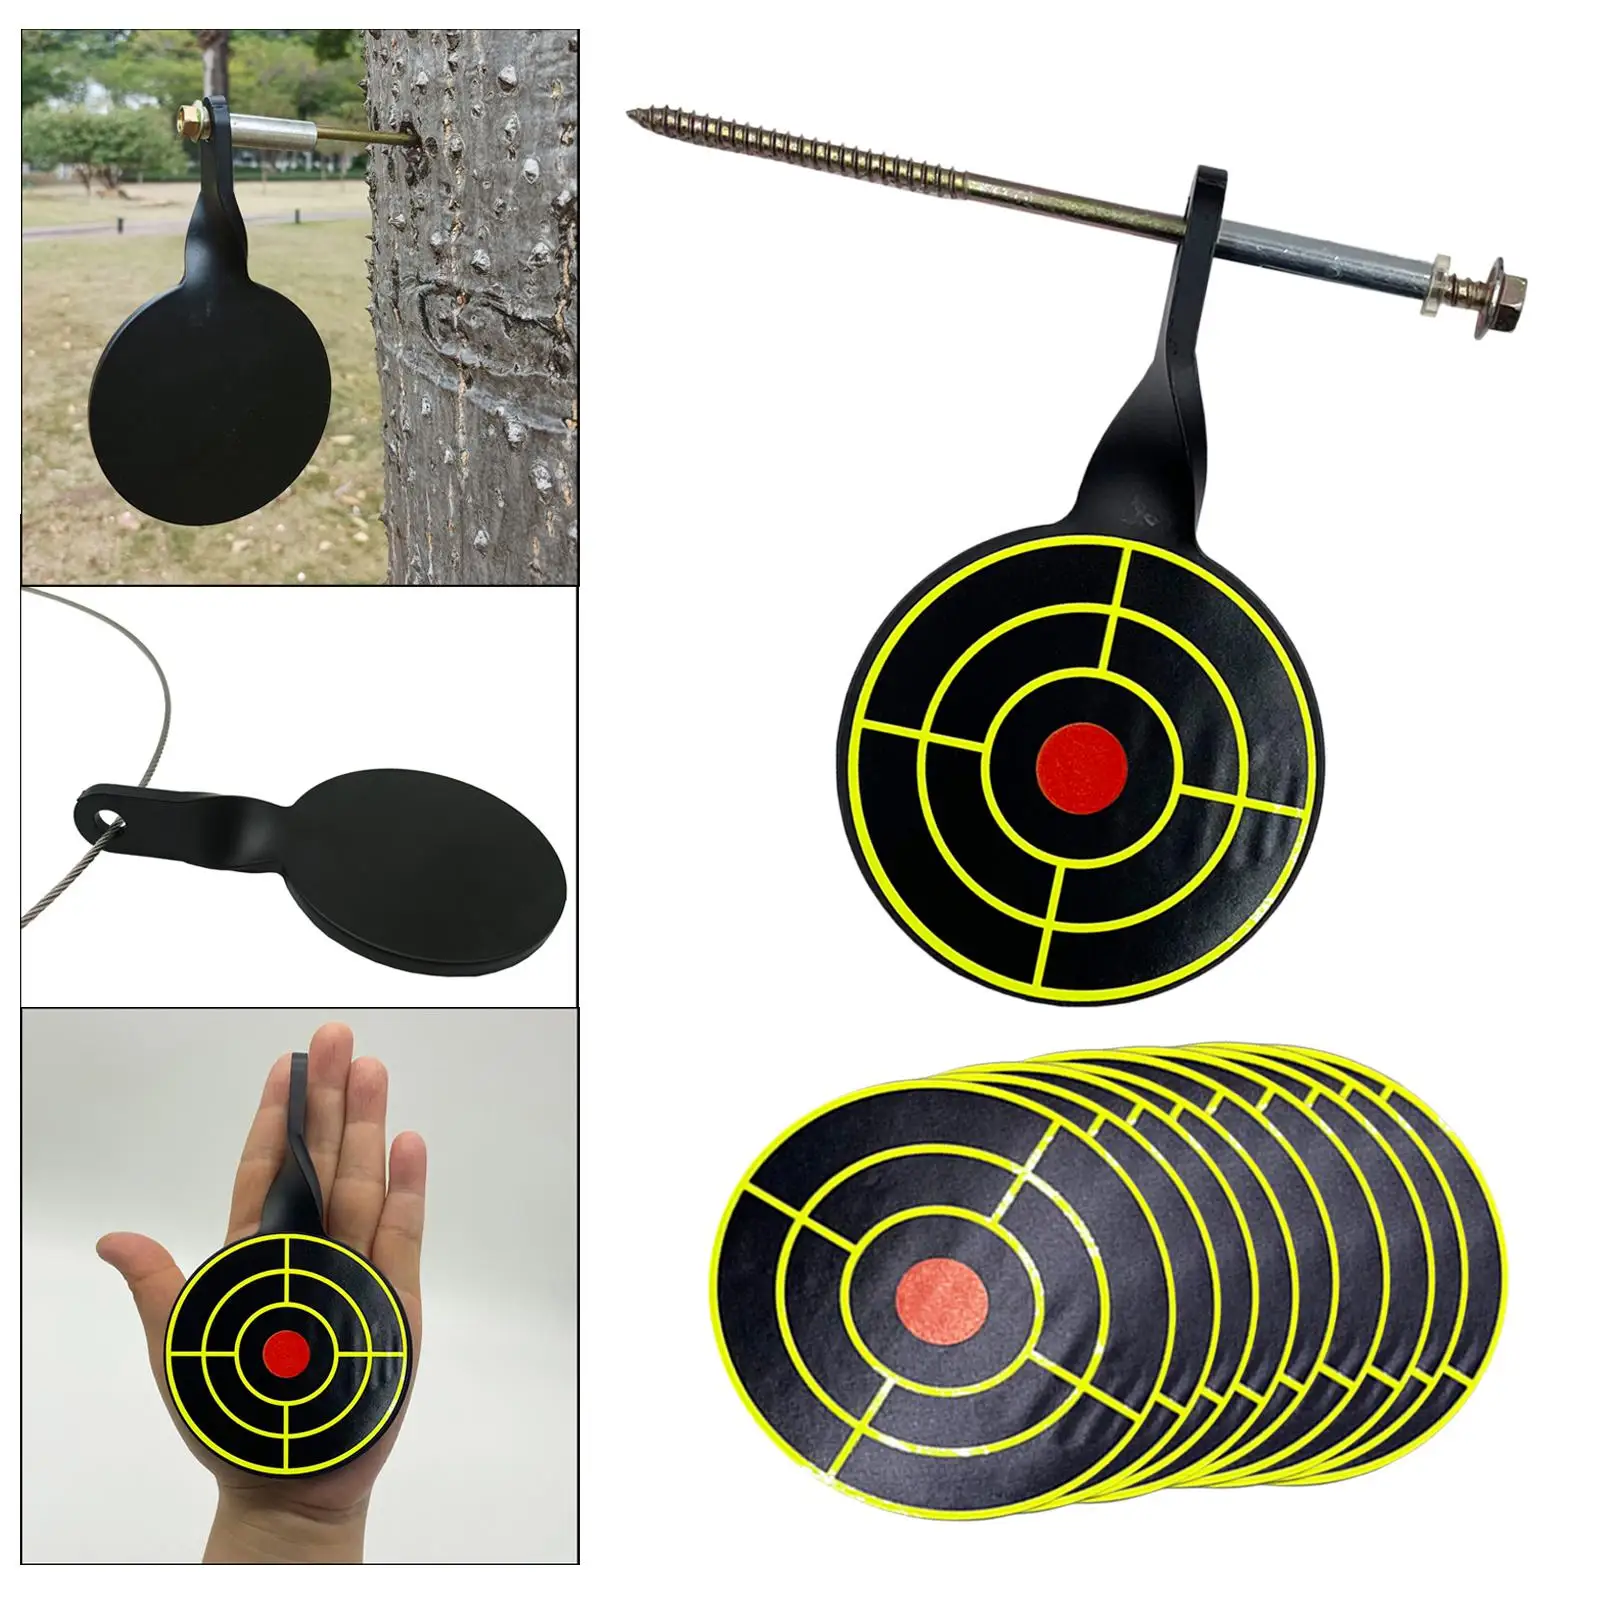 Metal Practice Target Portable 5mm Tree Standing Target Easy Carry for Outdoor Sports Toy